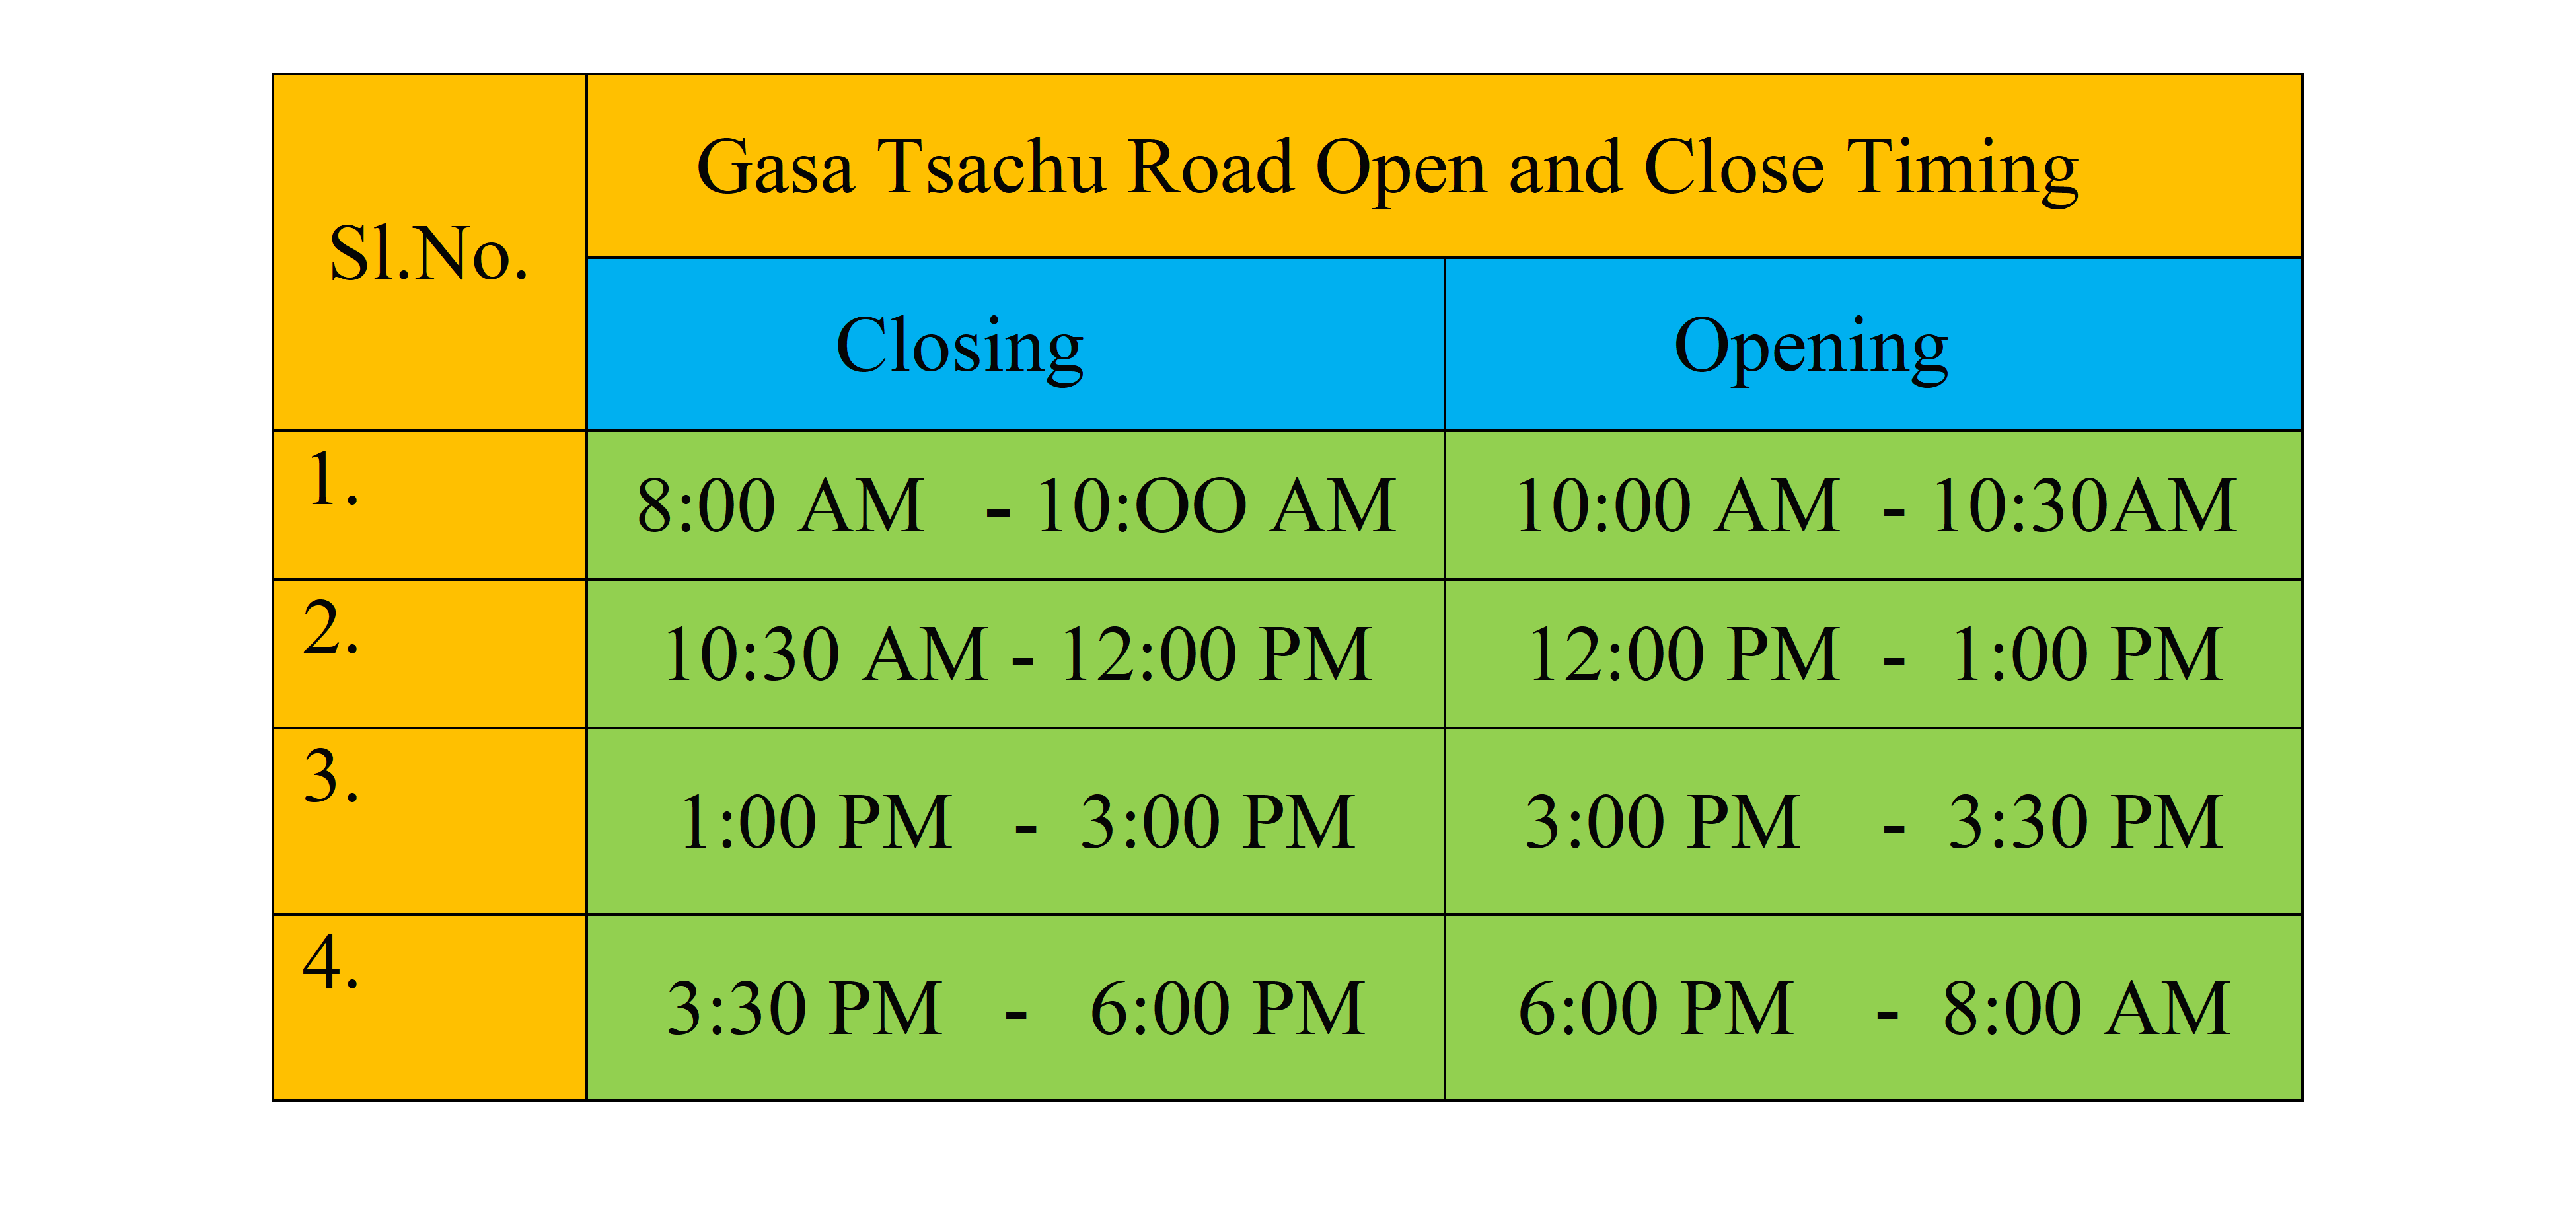  timing for opening and closing of the road.